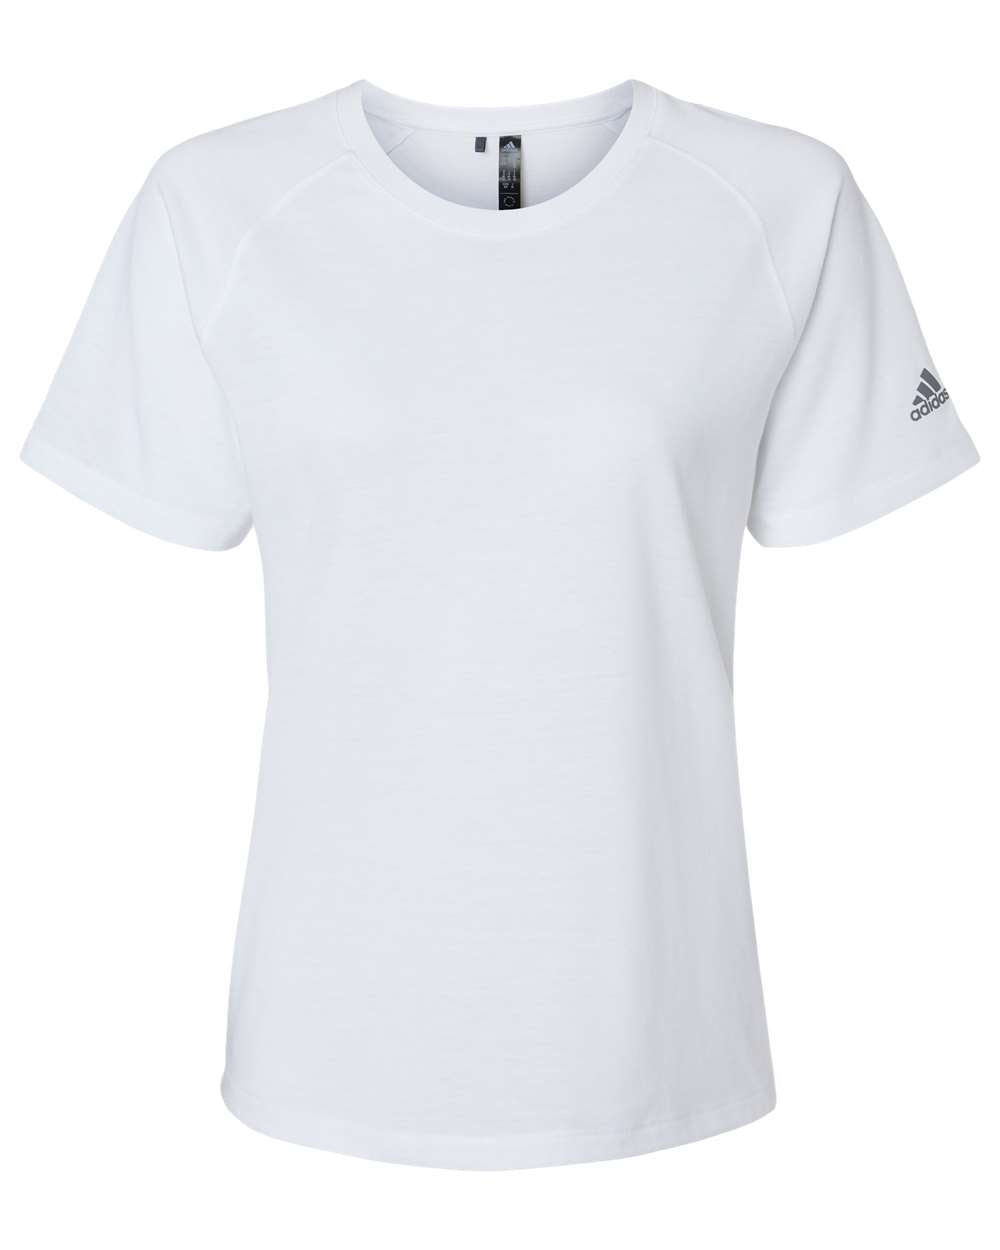 Adidas A557 Women's Blended T-Shirt #color_White